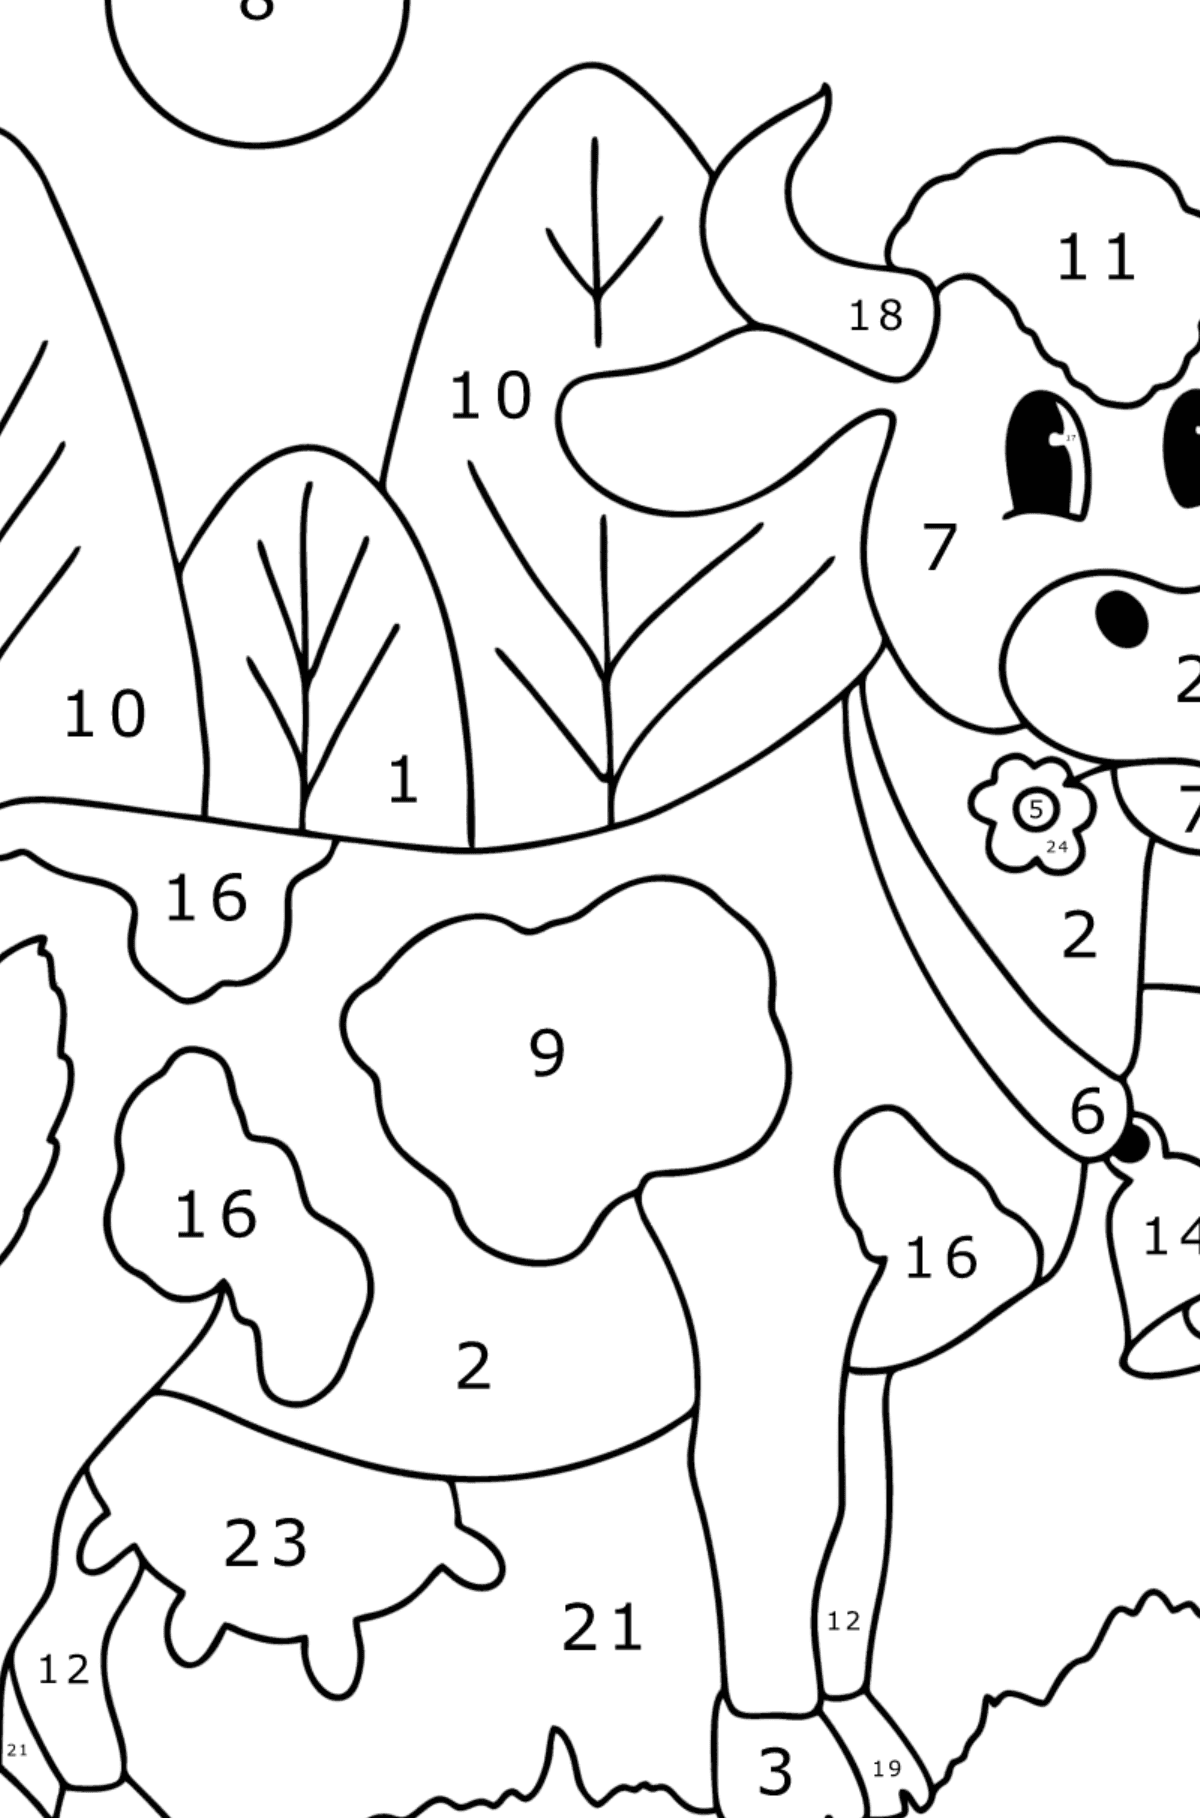 Realistic cow coloring page - Coloring by Numbers for Kids